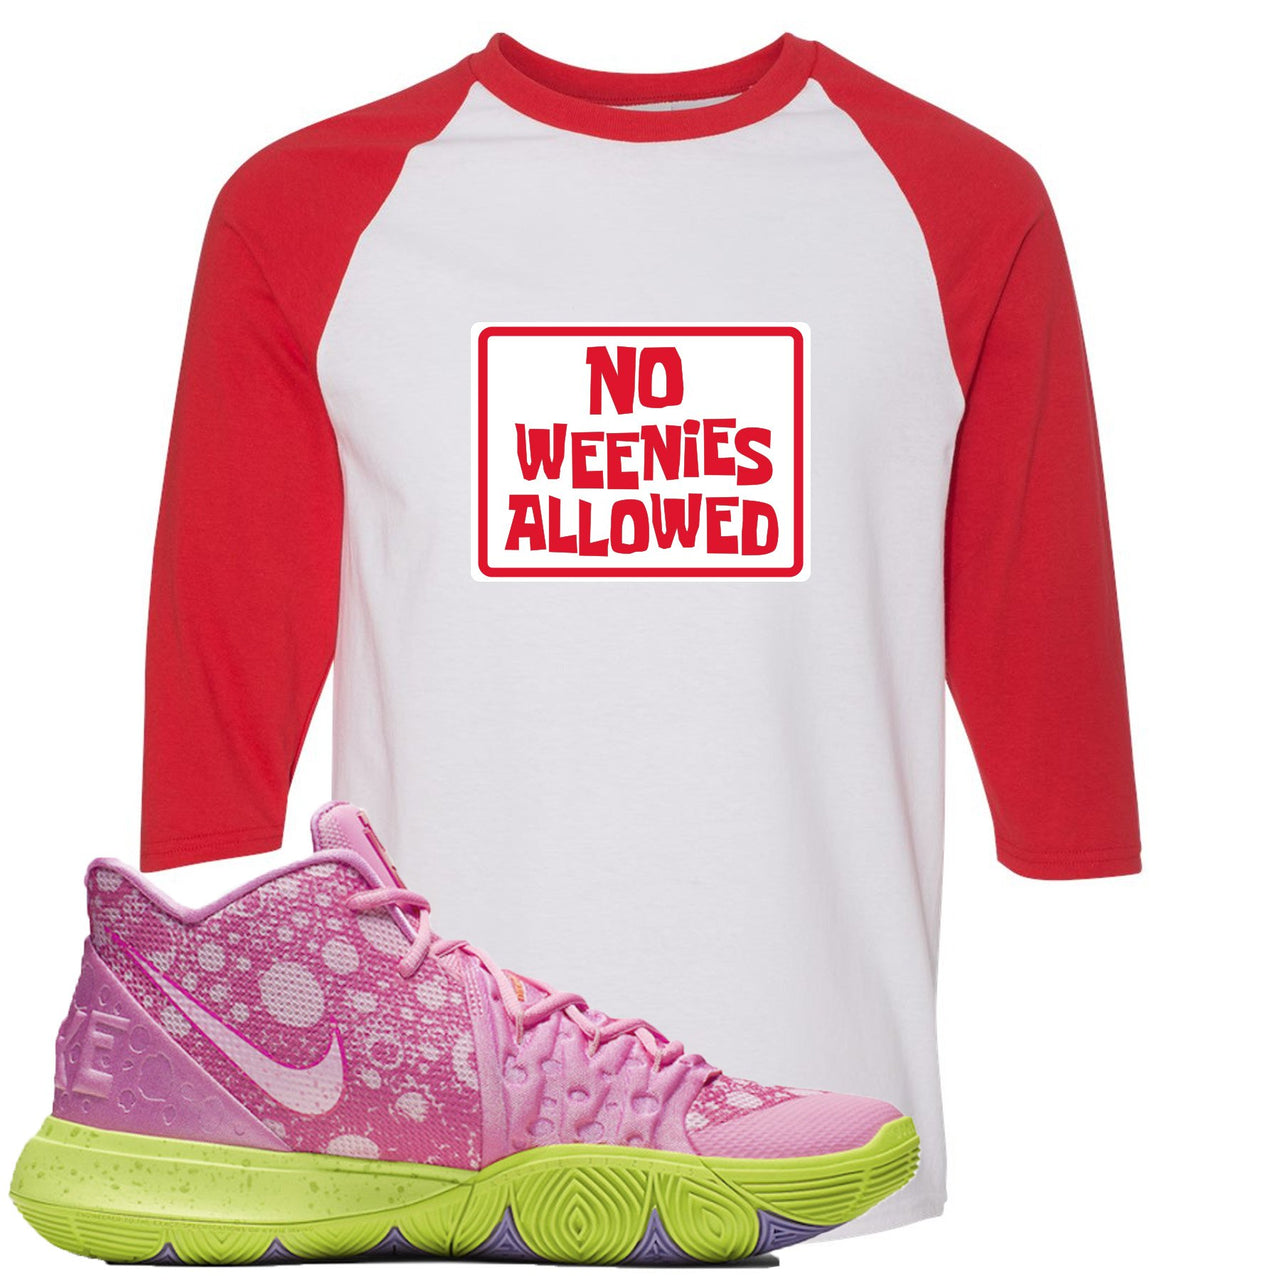 Patrick K5s Raglan T Shirt | No Weenies Allowed, White and Red